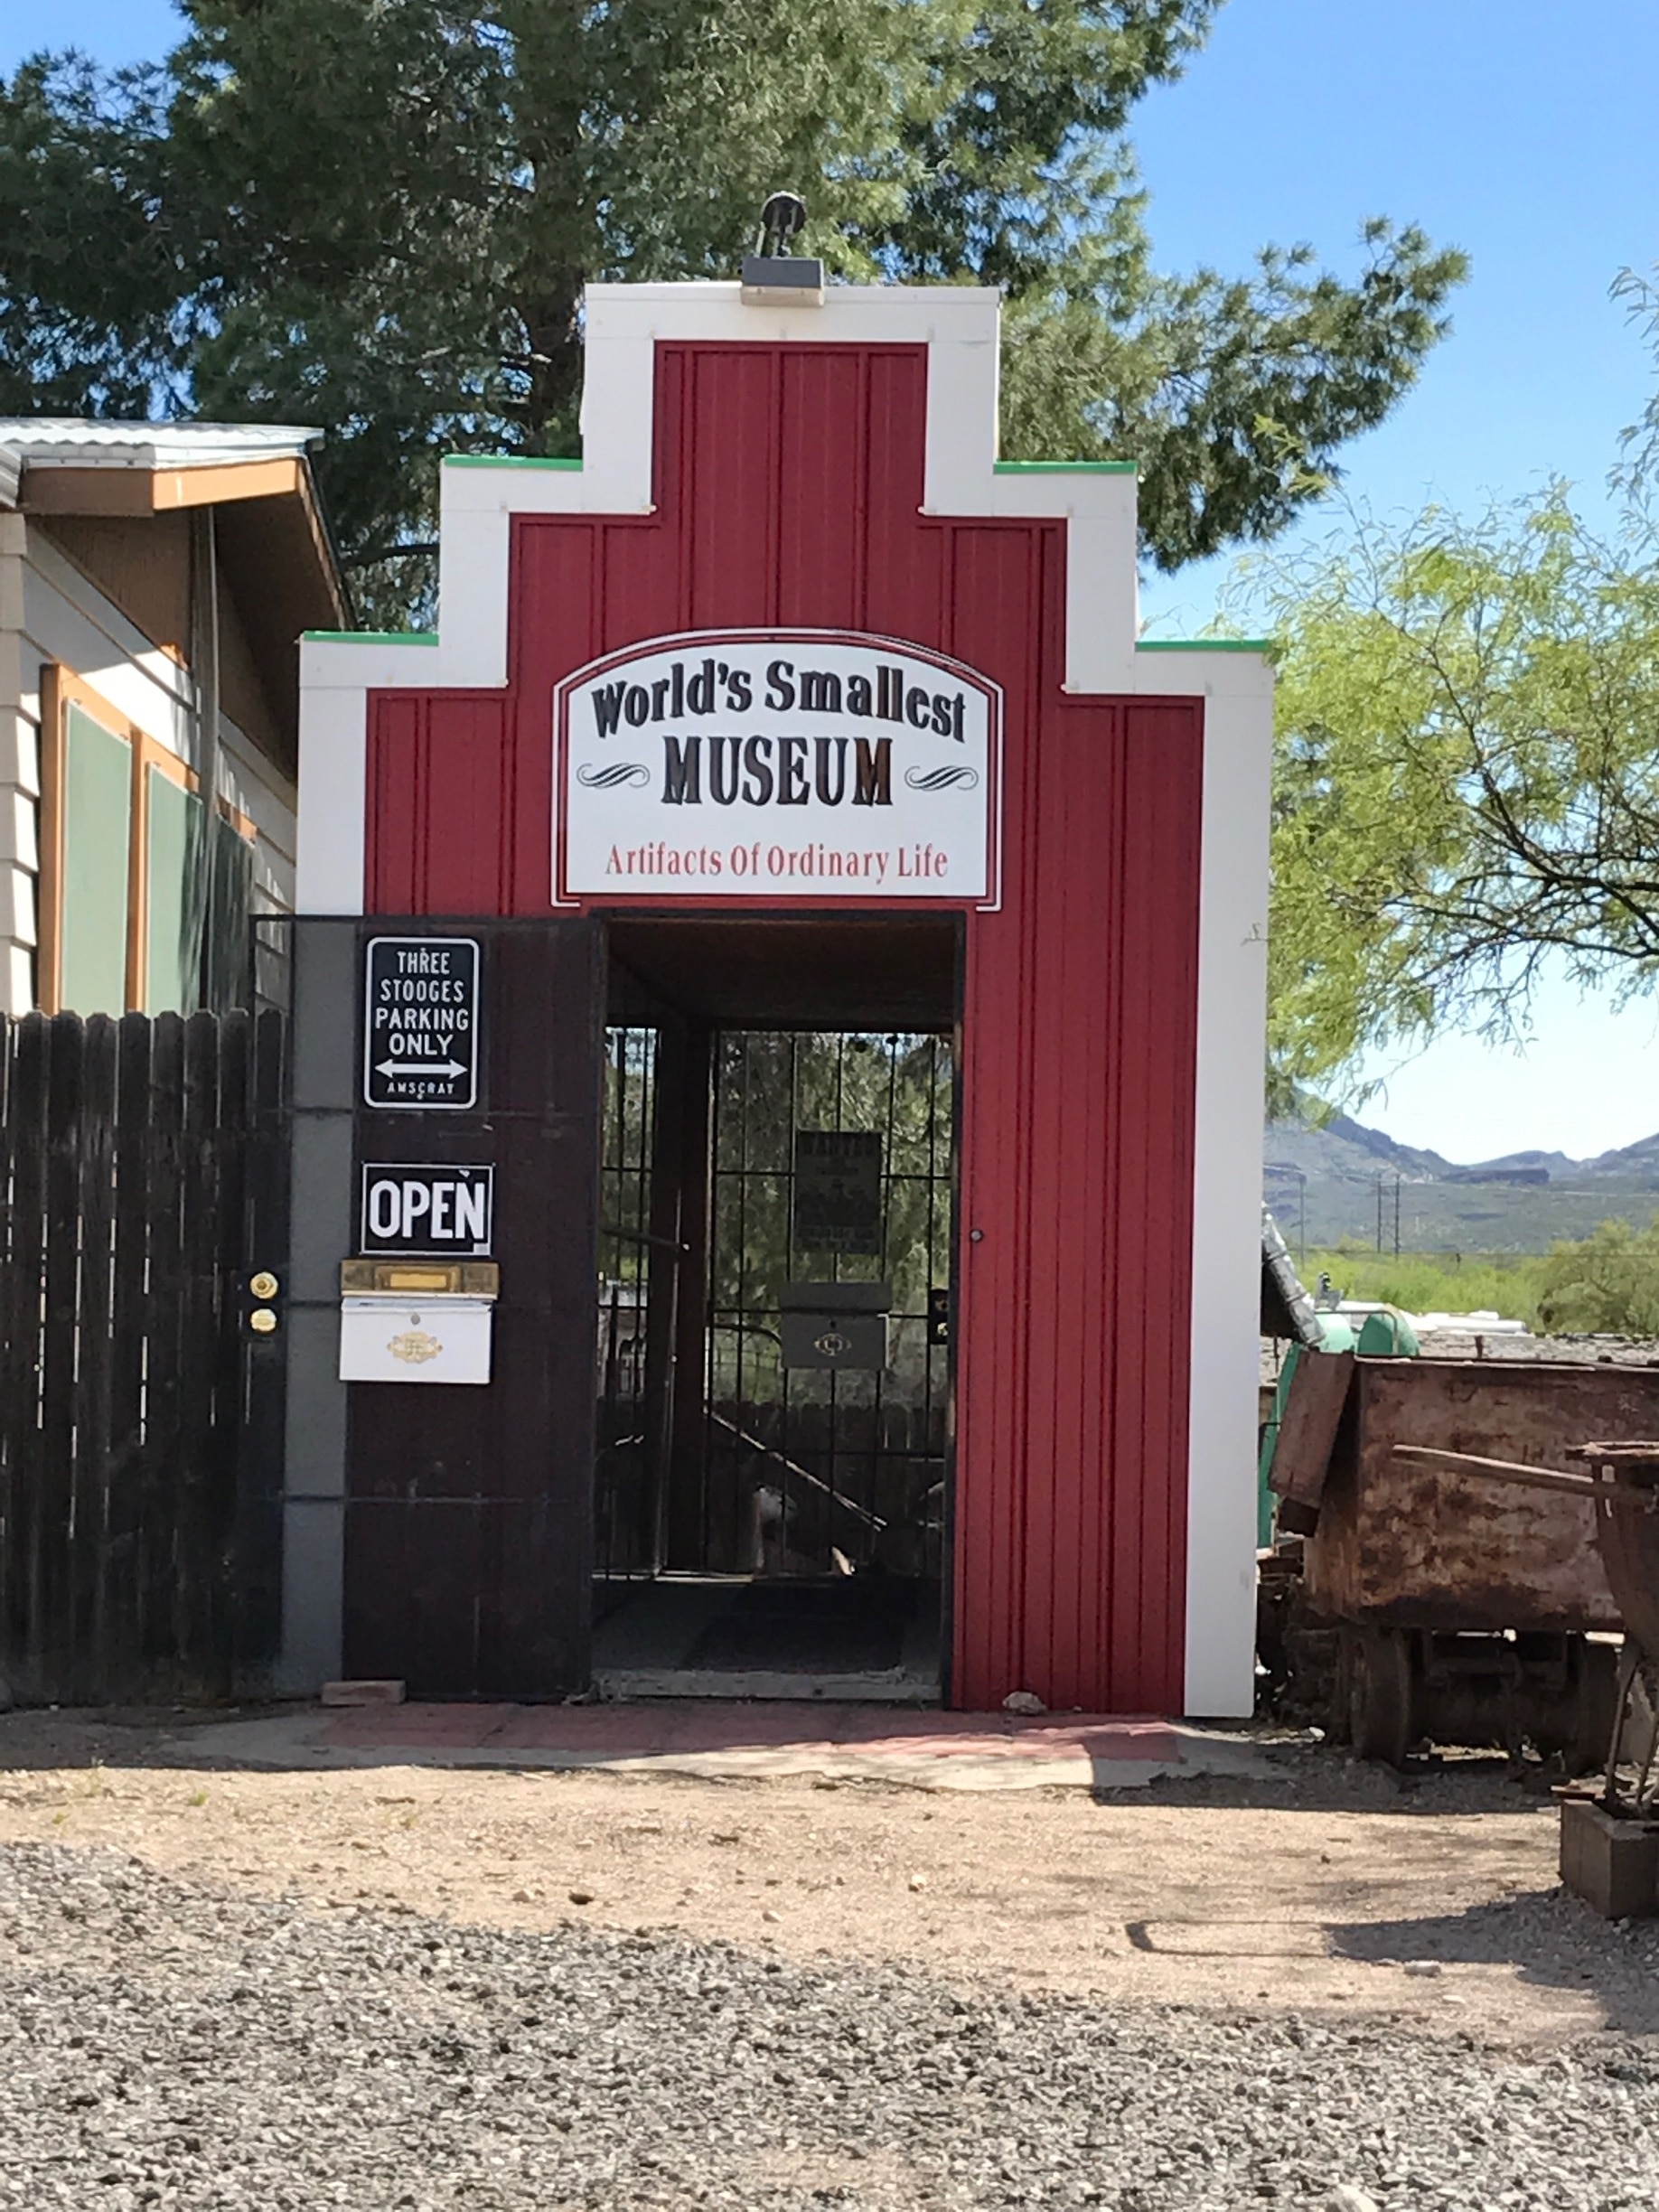 Tucked away in the town of Superior, AZ sits a tiny museum appropriately called, "World's Smallest Museum". Once you visit, you will likely agree. Definitely worth a photo.